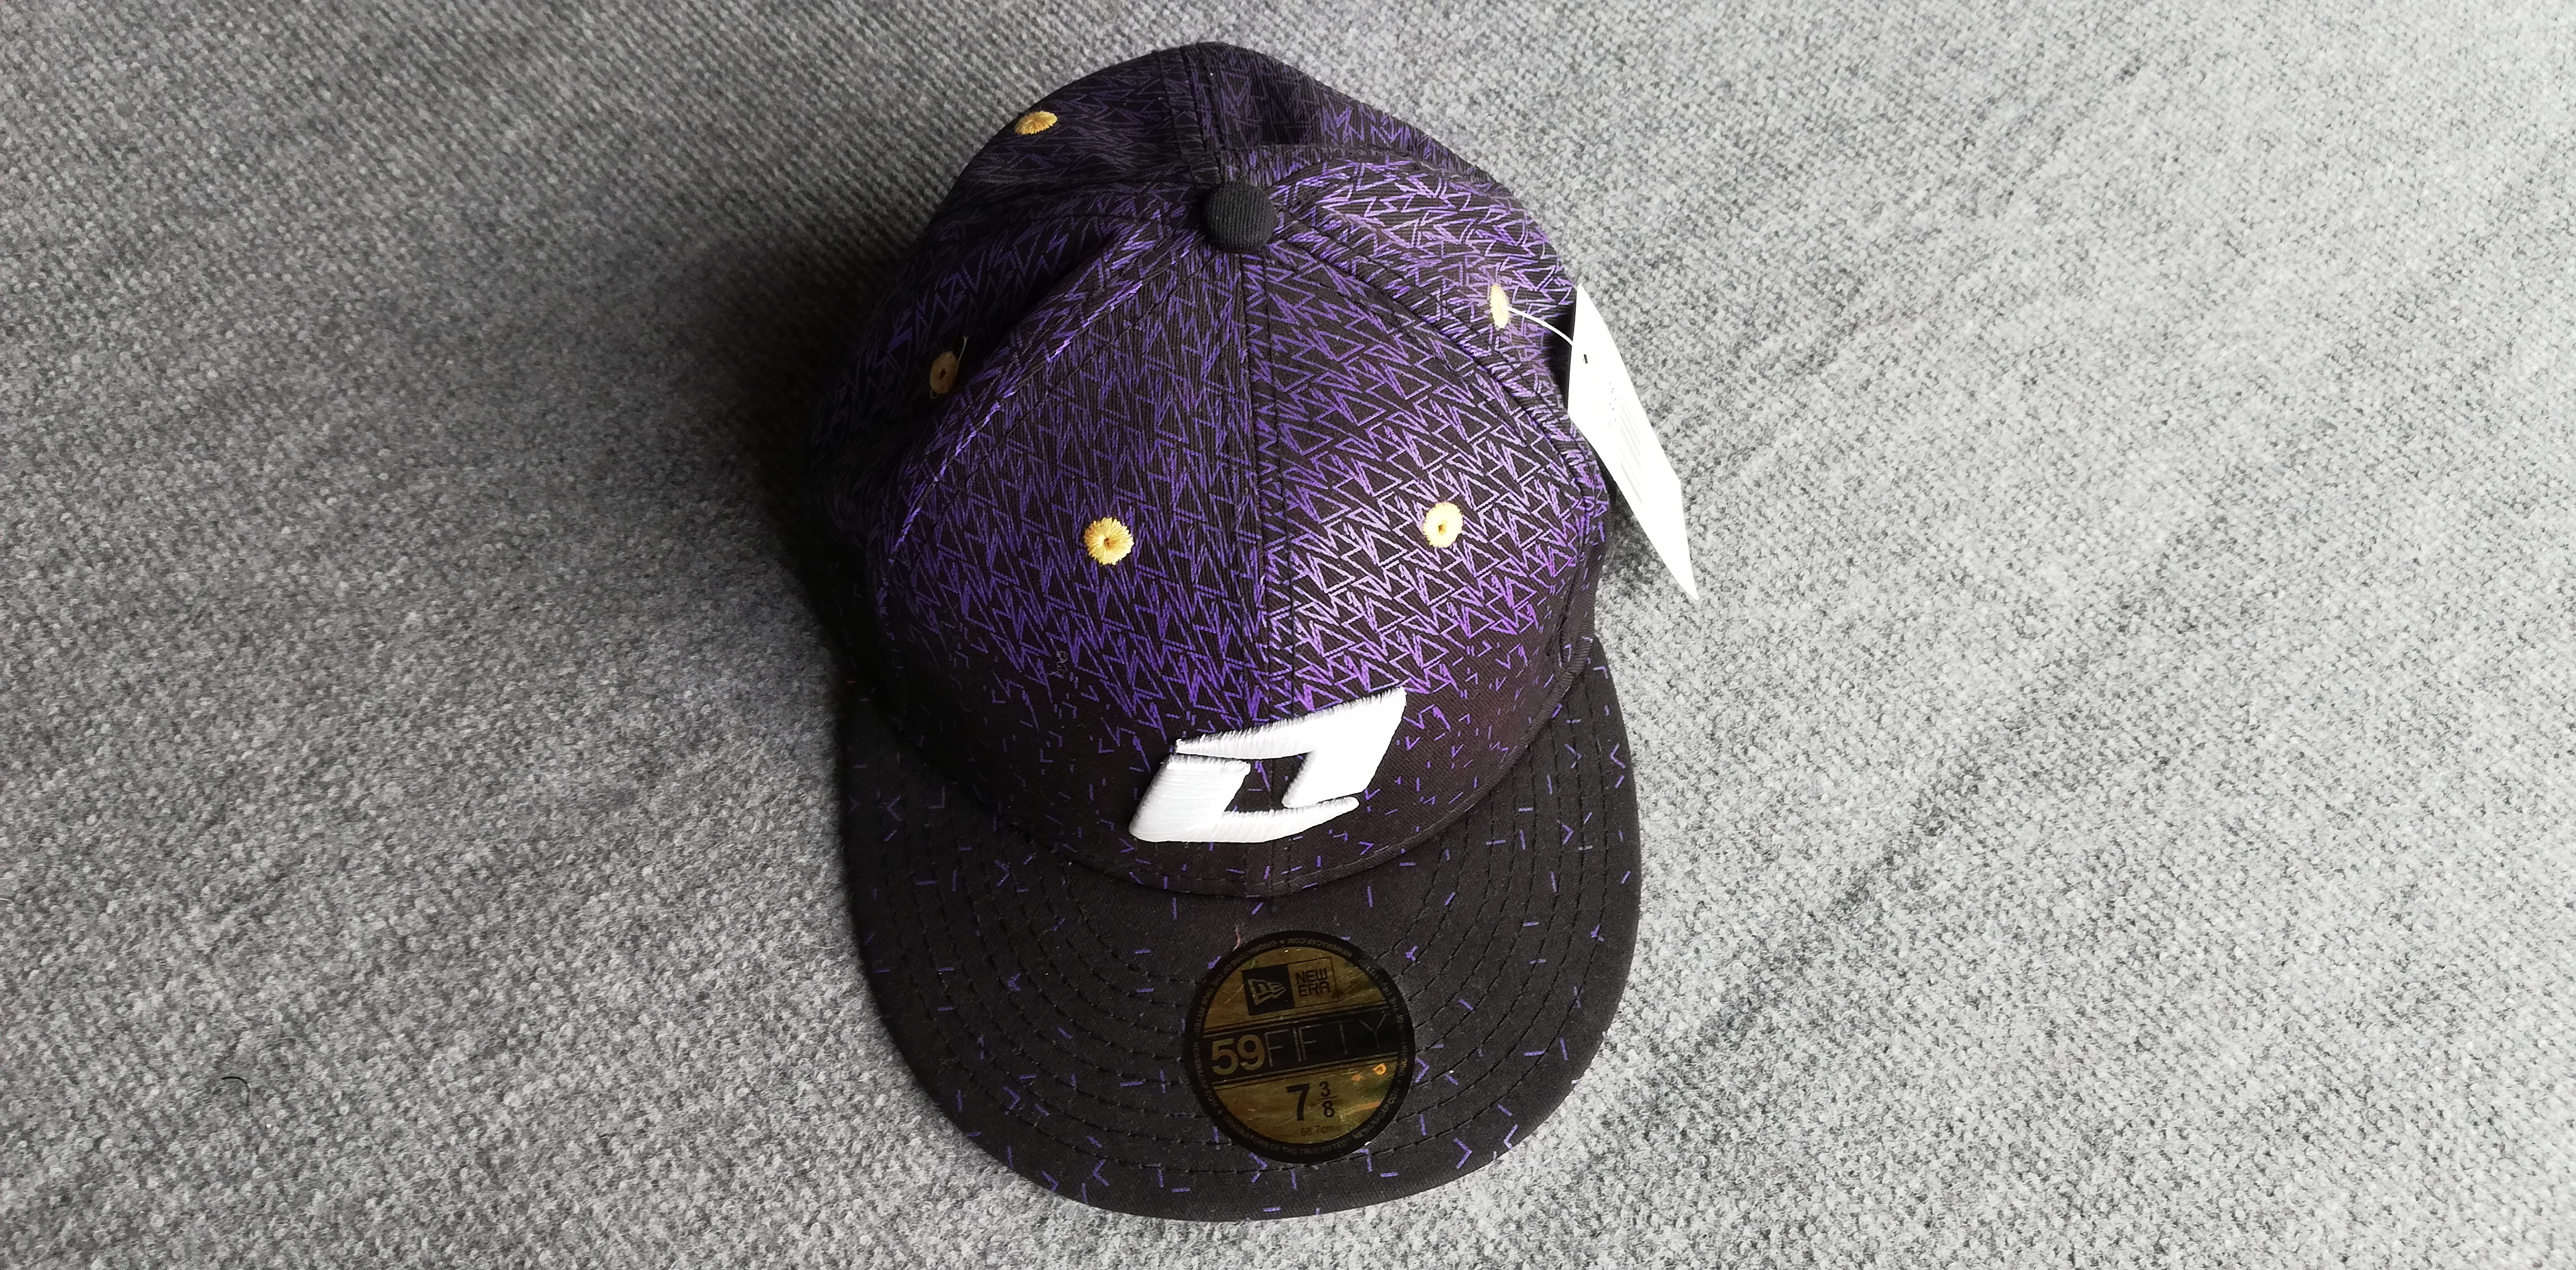 One Cap 59 Fifty